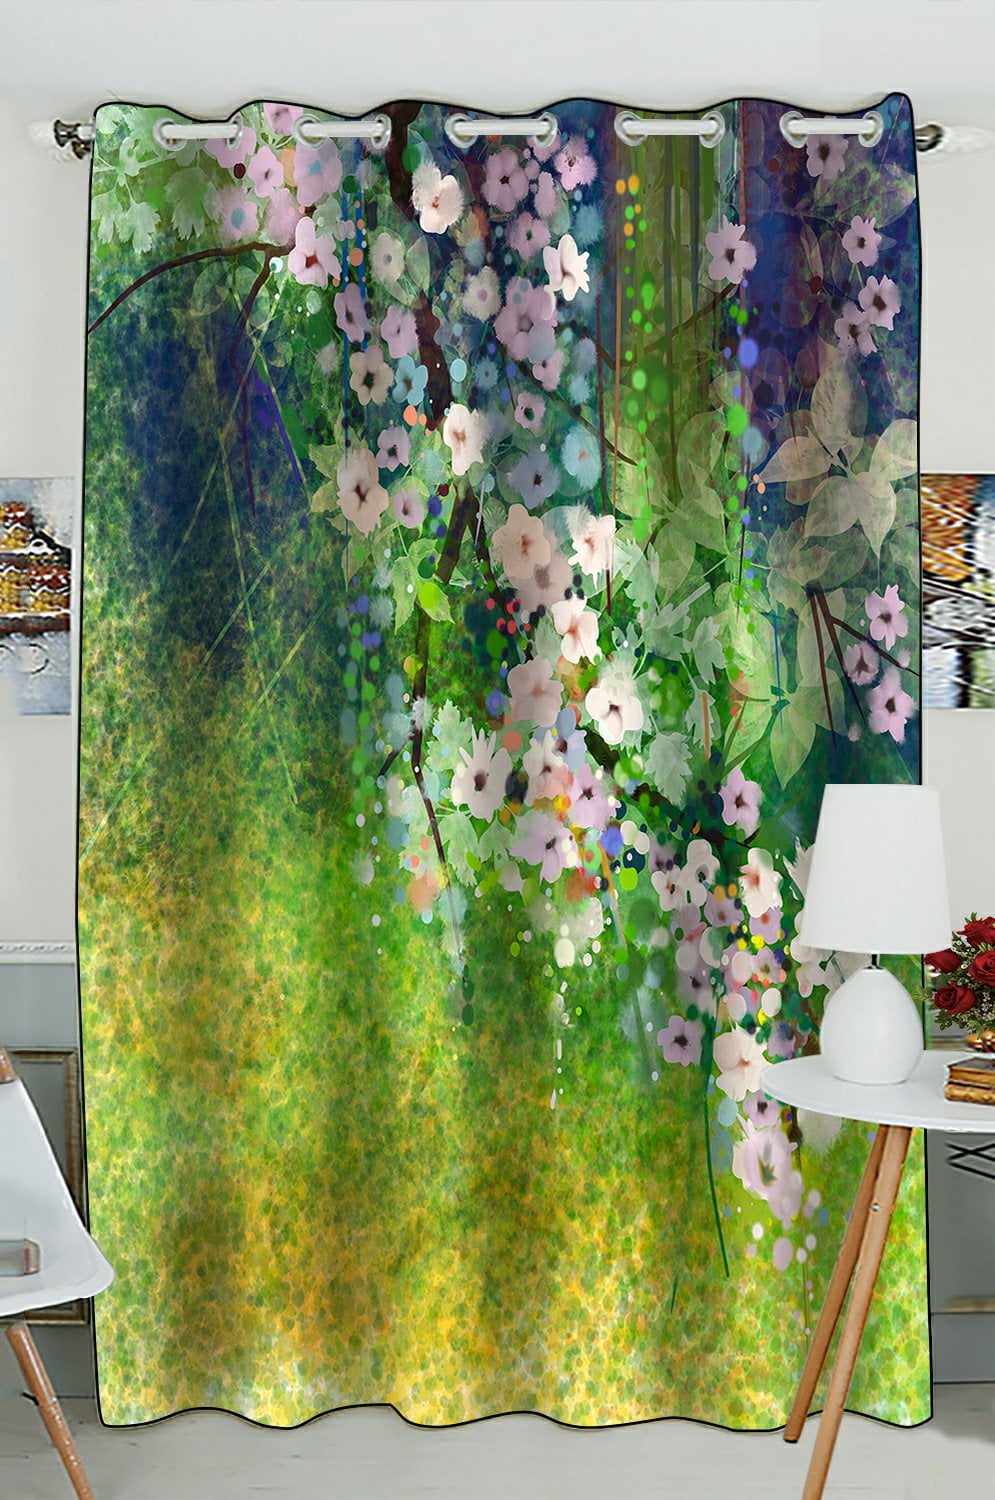 PHFZK Abstract Floral Design Window Curtain, Watercolor Painting ...